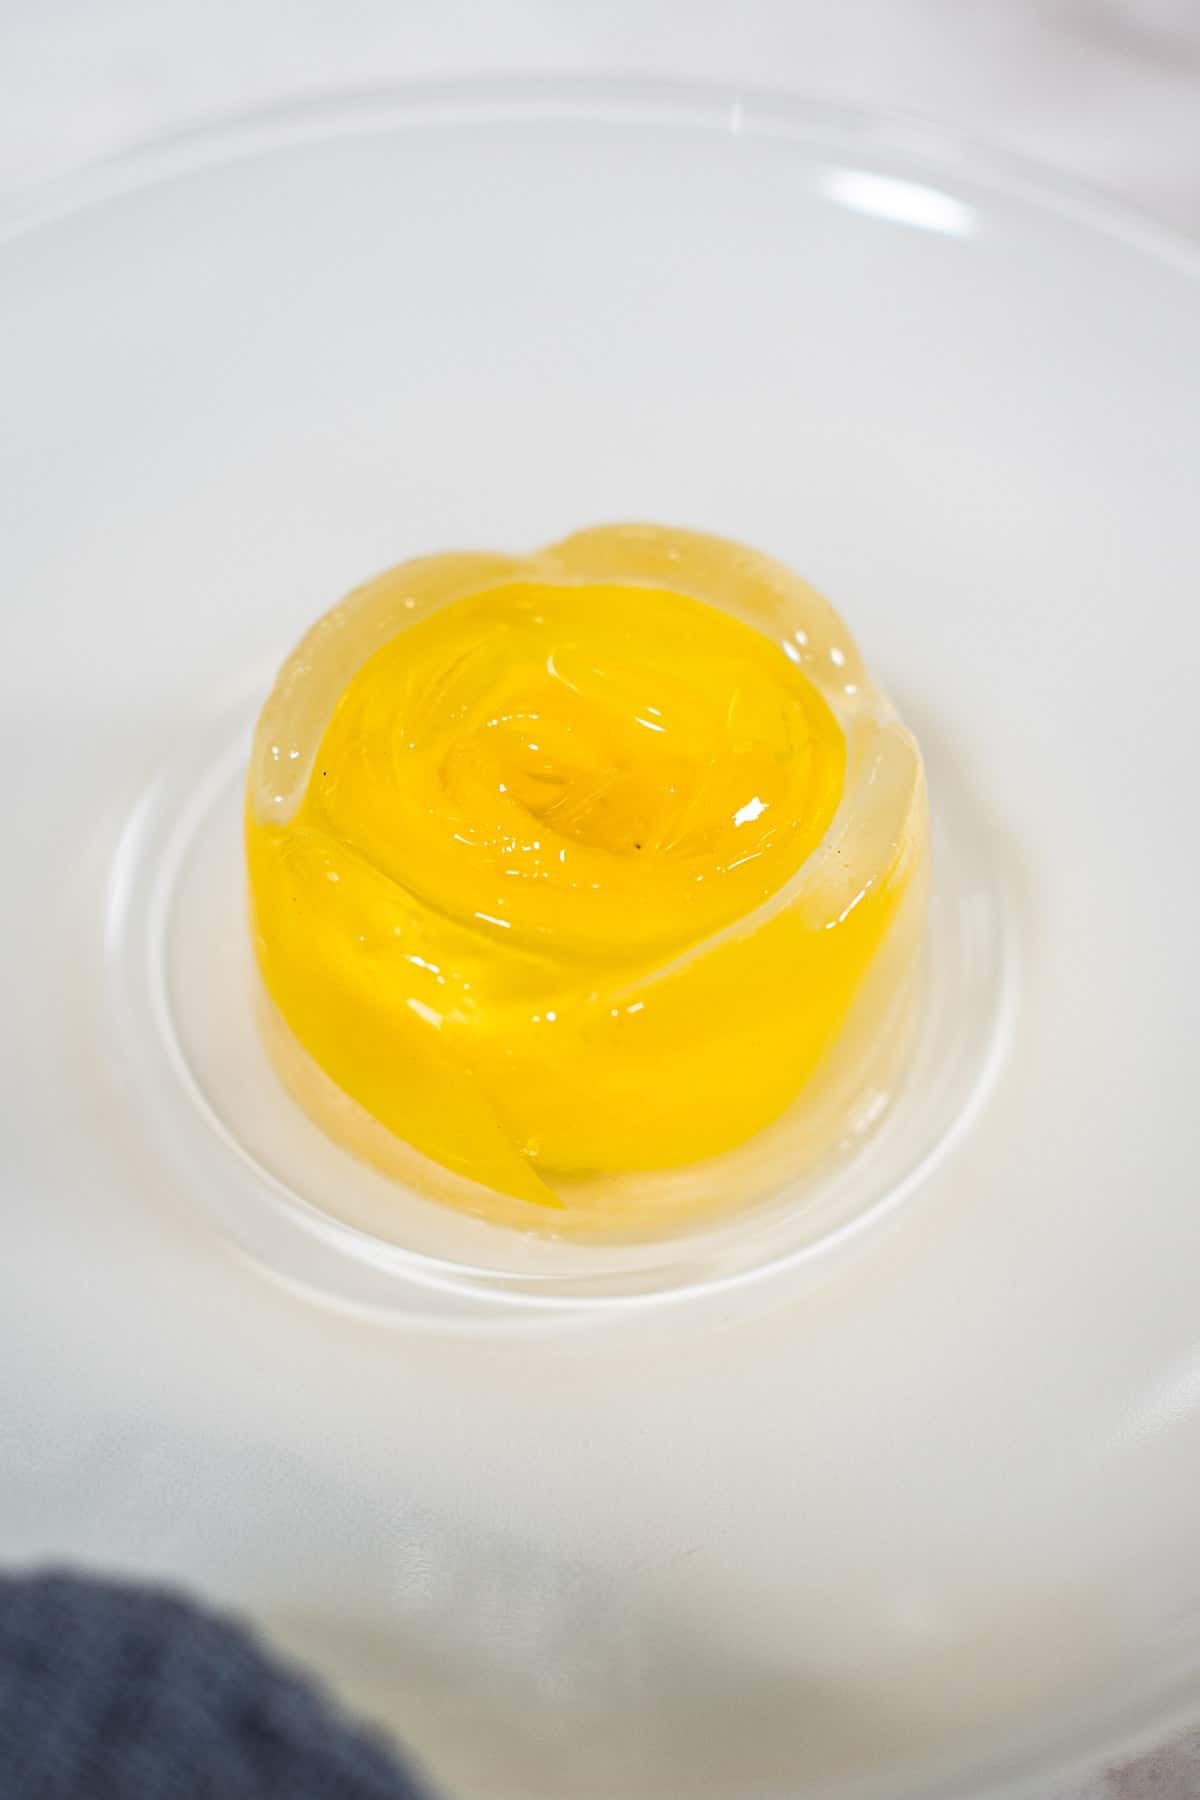 Rose shaped jelly on a white plate.